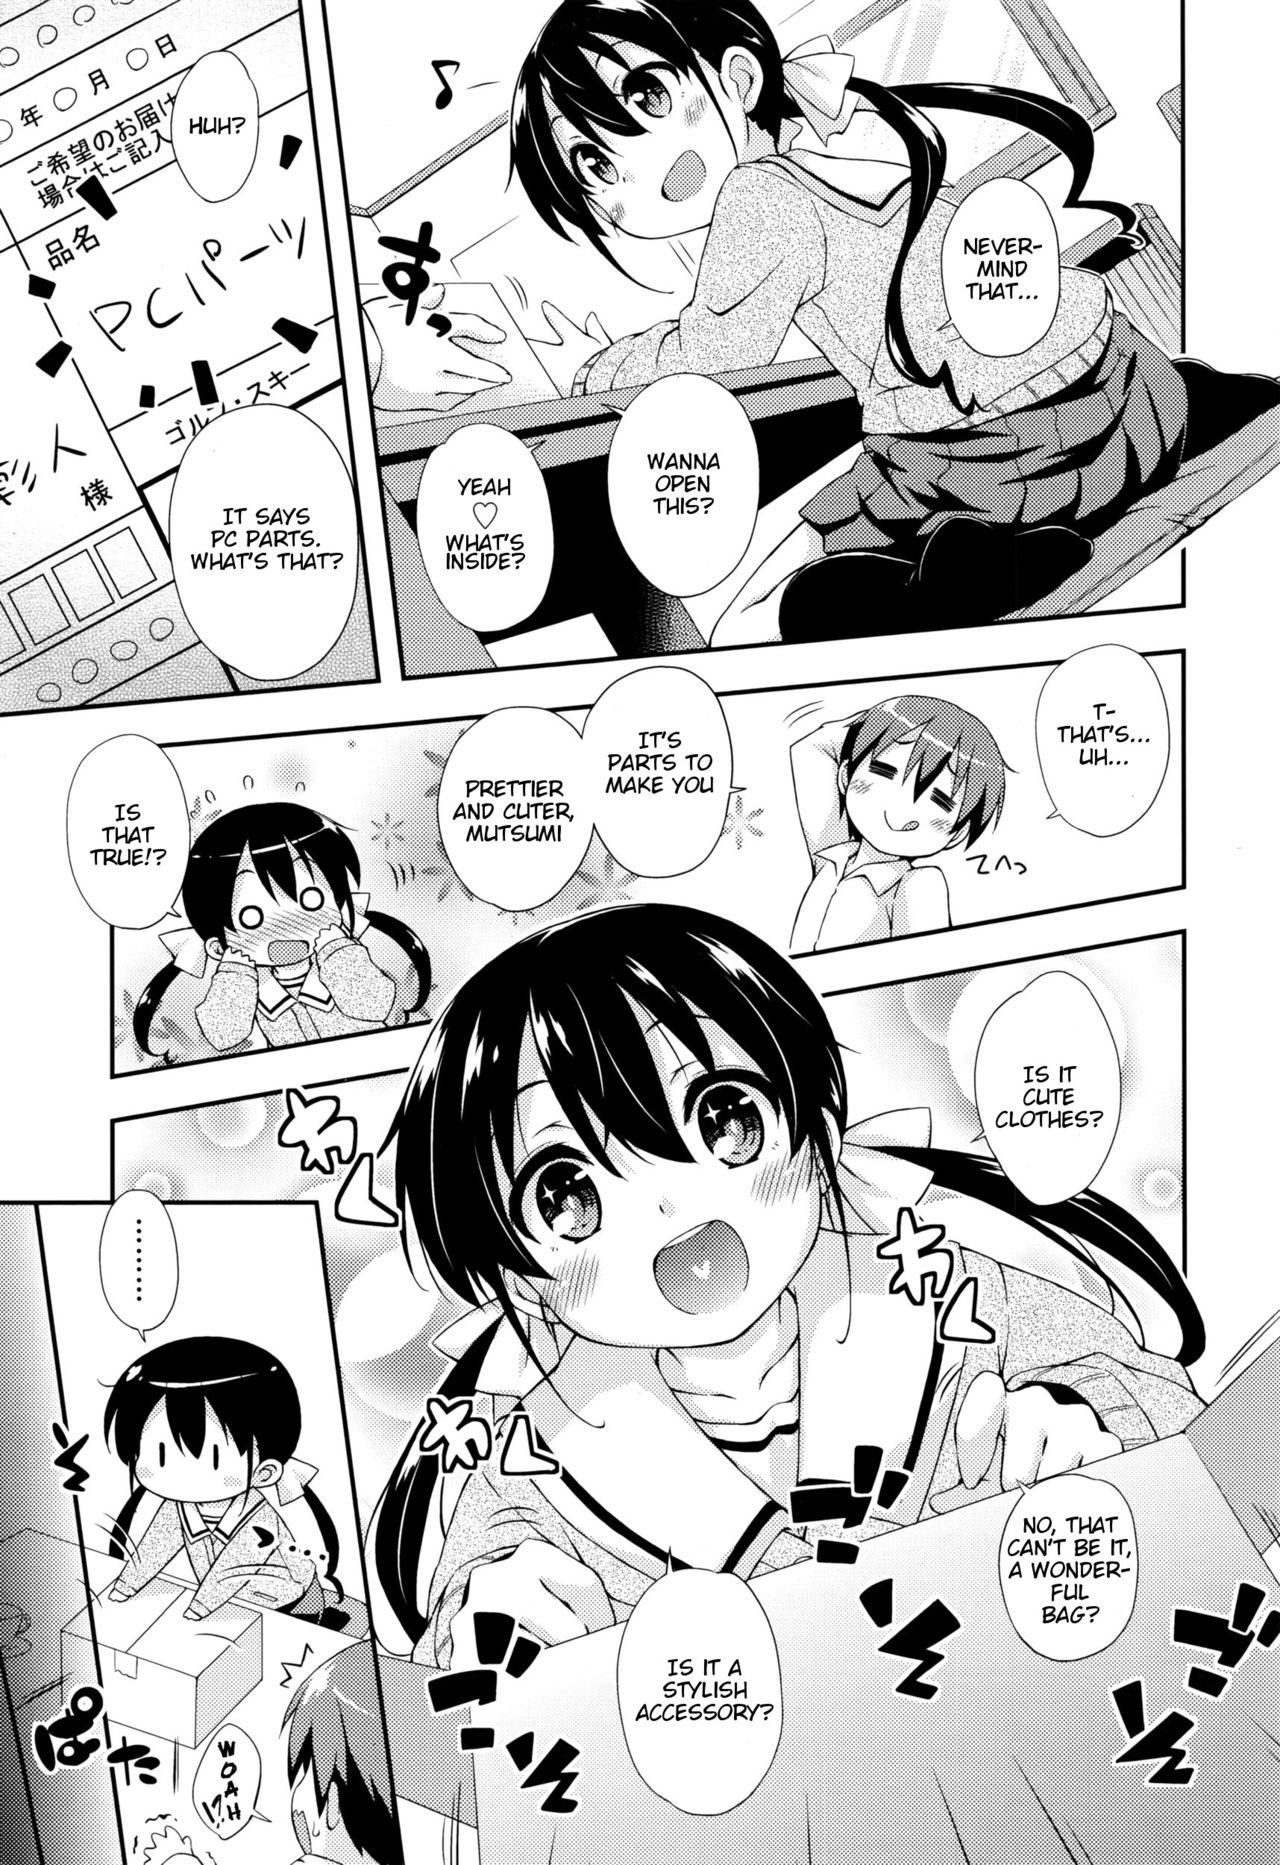 Weird Kanojo no PC Parts Assfucking - Page 3